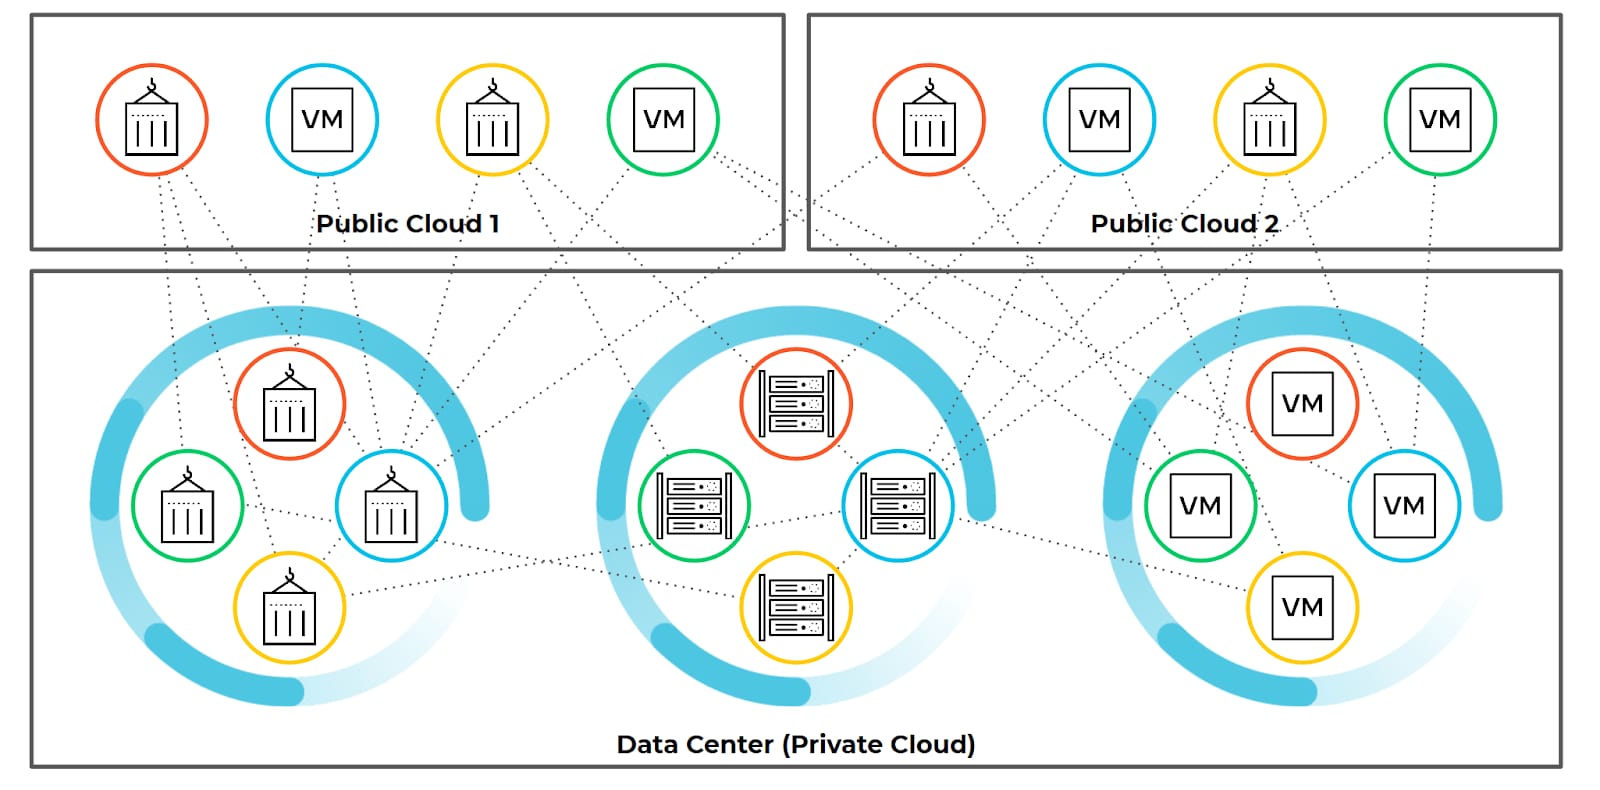 To fully apply Zero Trust, organizations must take into account the principle of Zero Trust across workloads. This graphic shows how a hybrid network can be interconnected. Workloads can move across and between a variety of data centers and public clouds. 